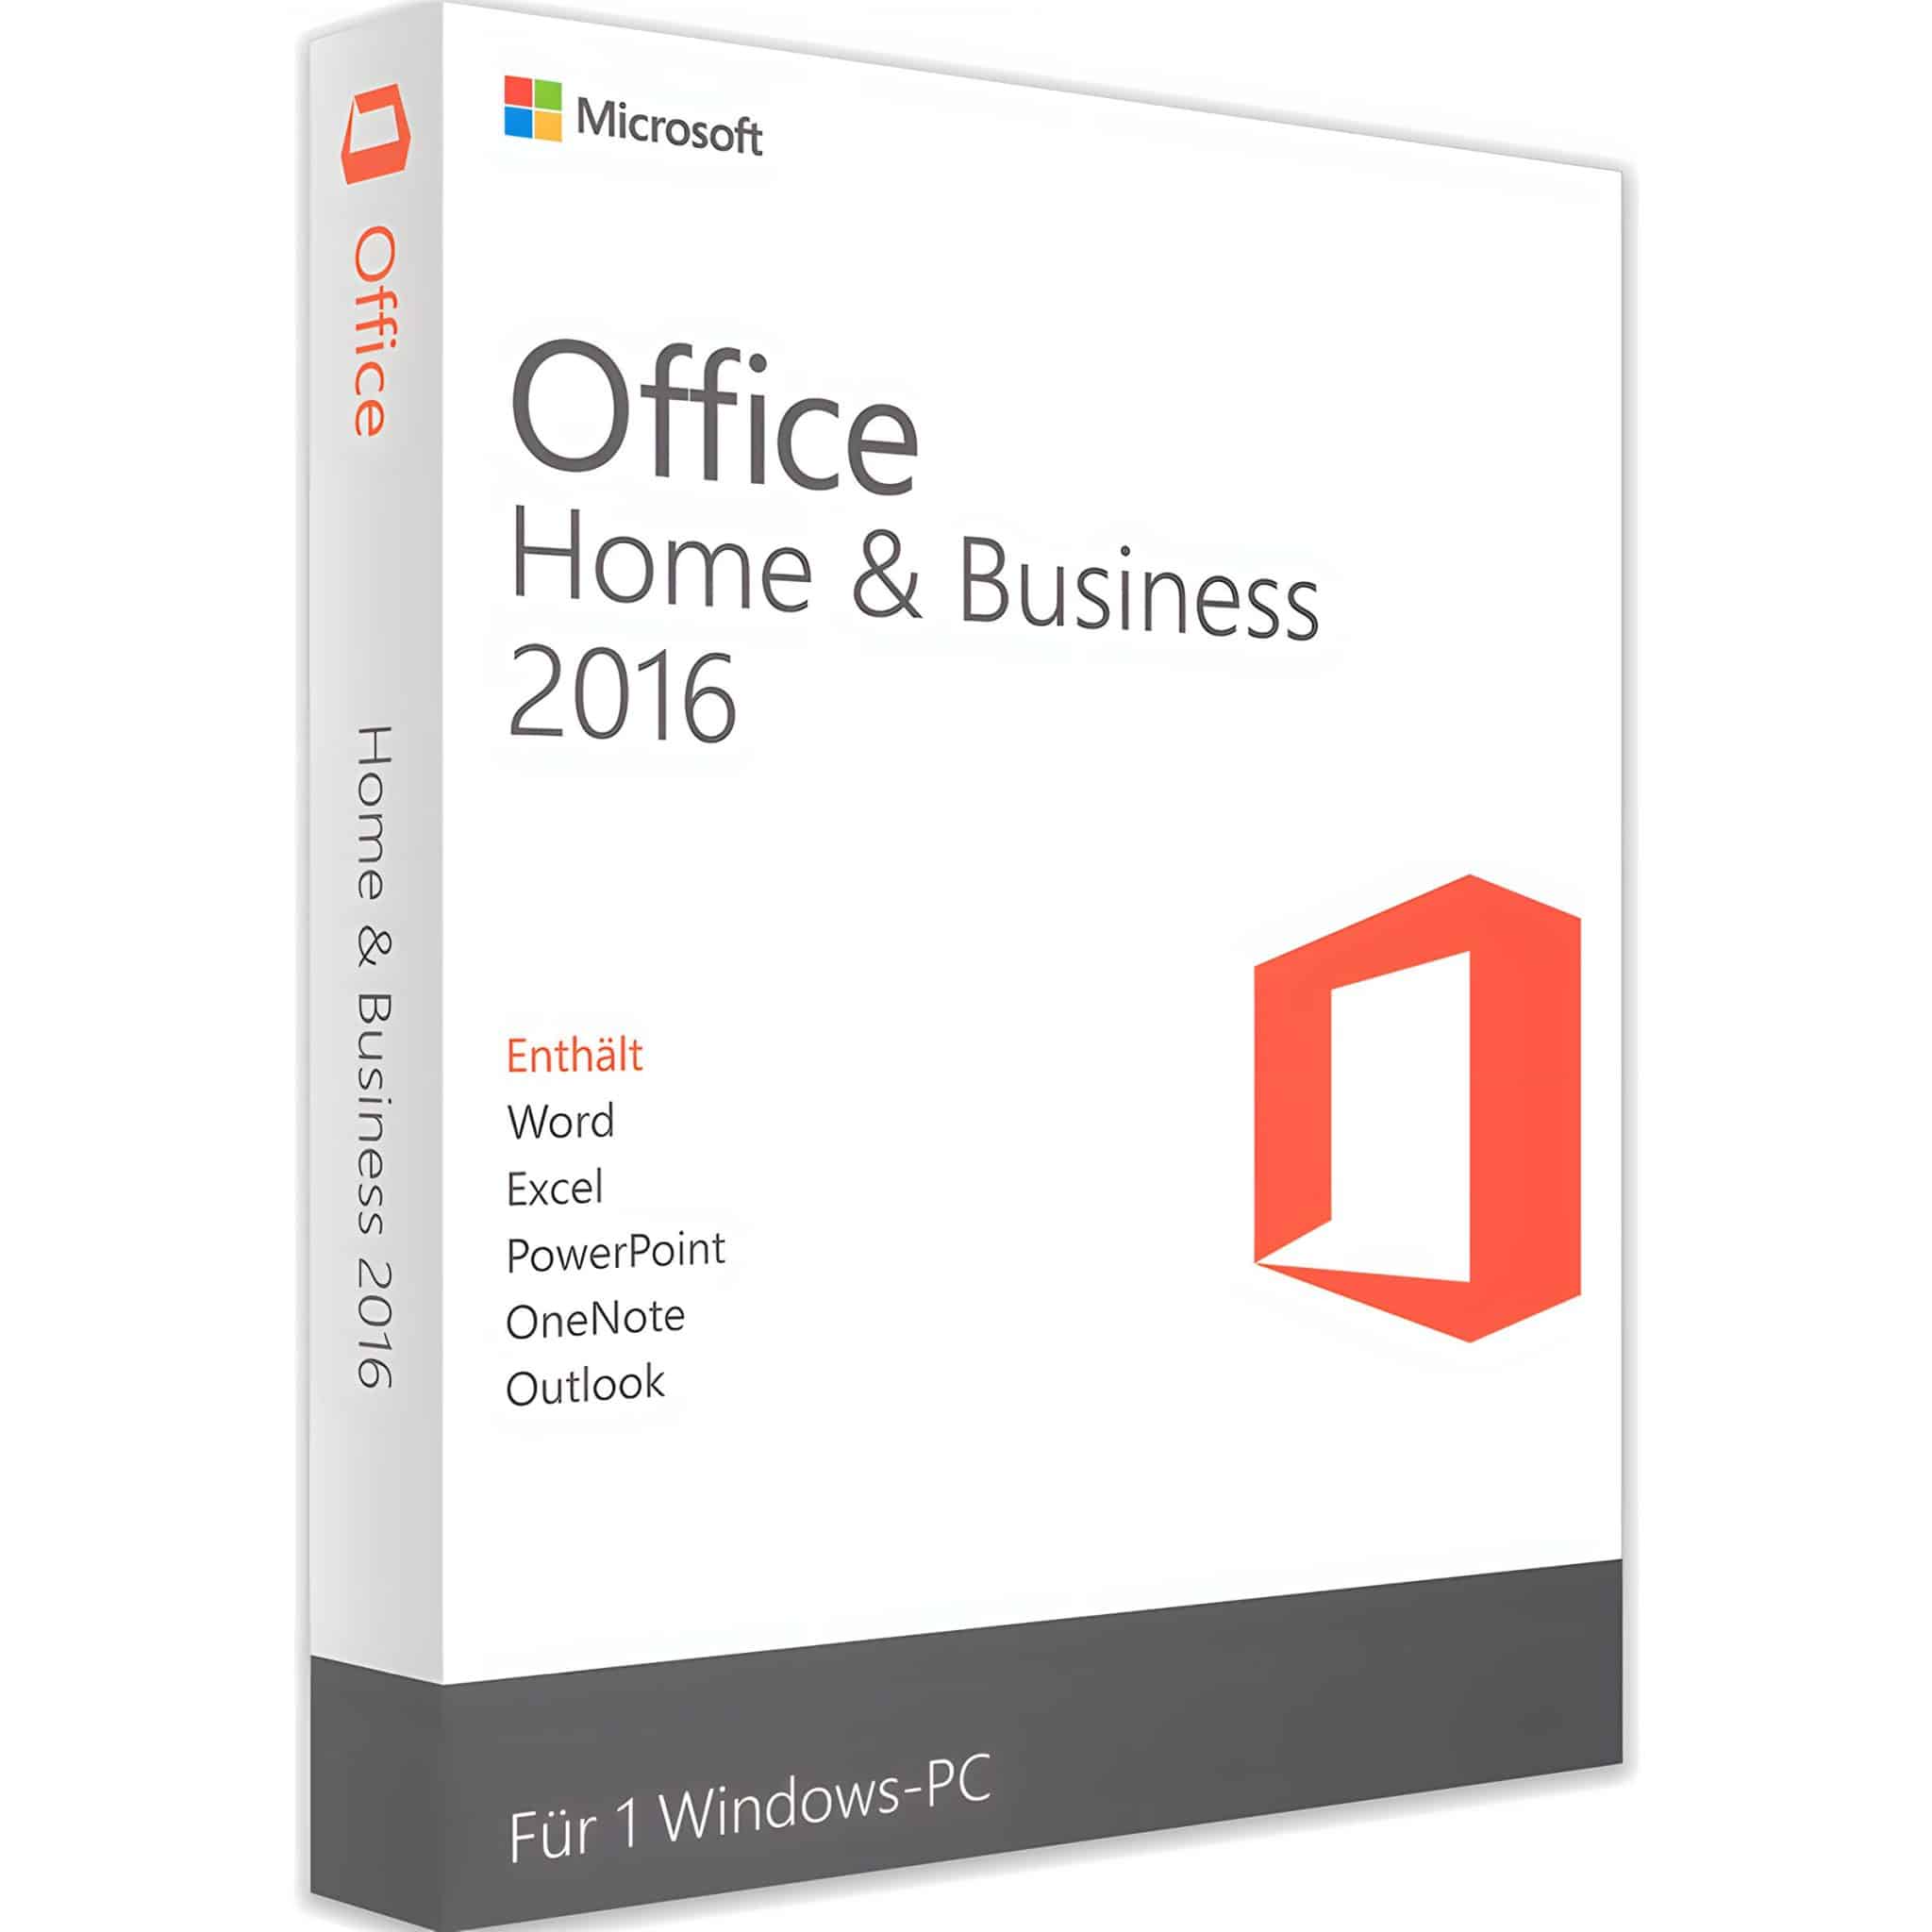 Microsoft Office Home and Business 2016 Product key for Windows PC